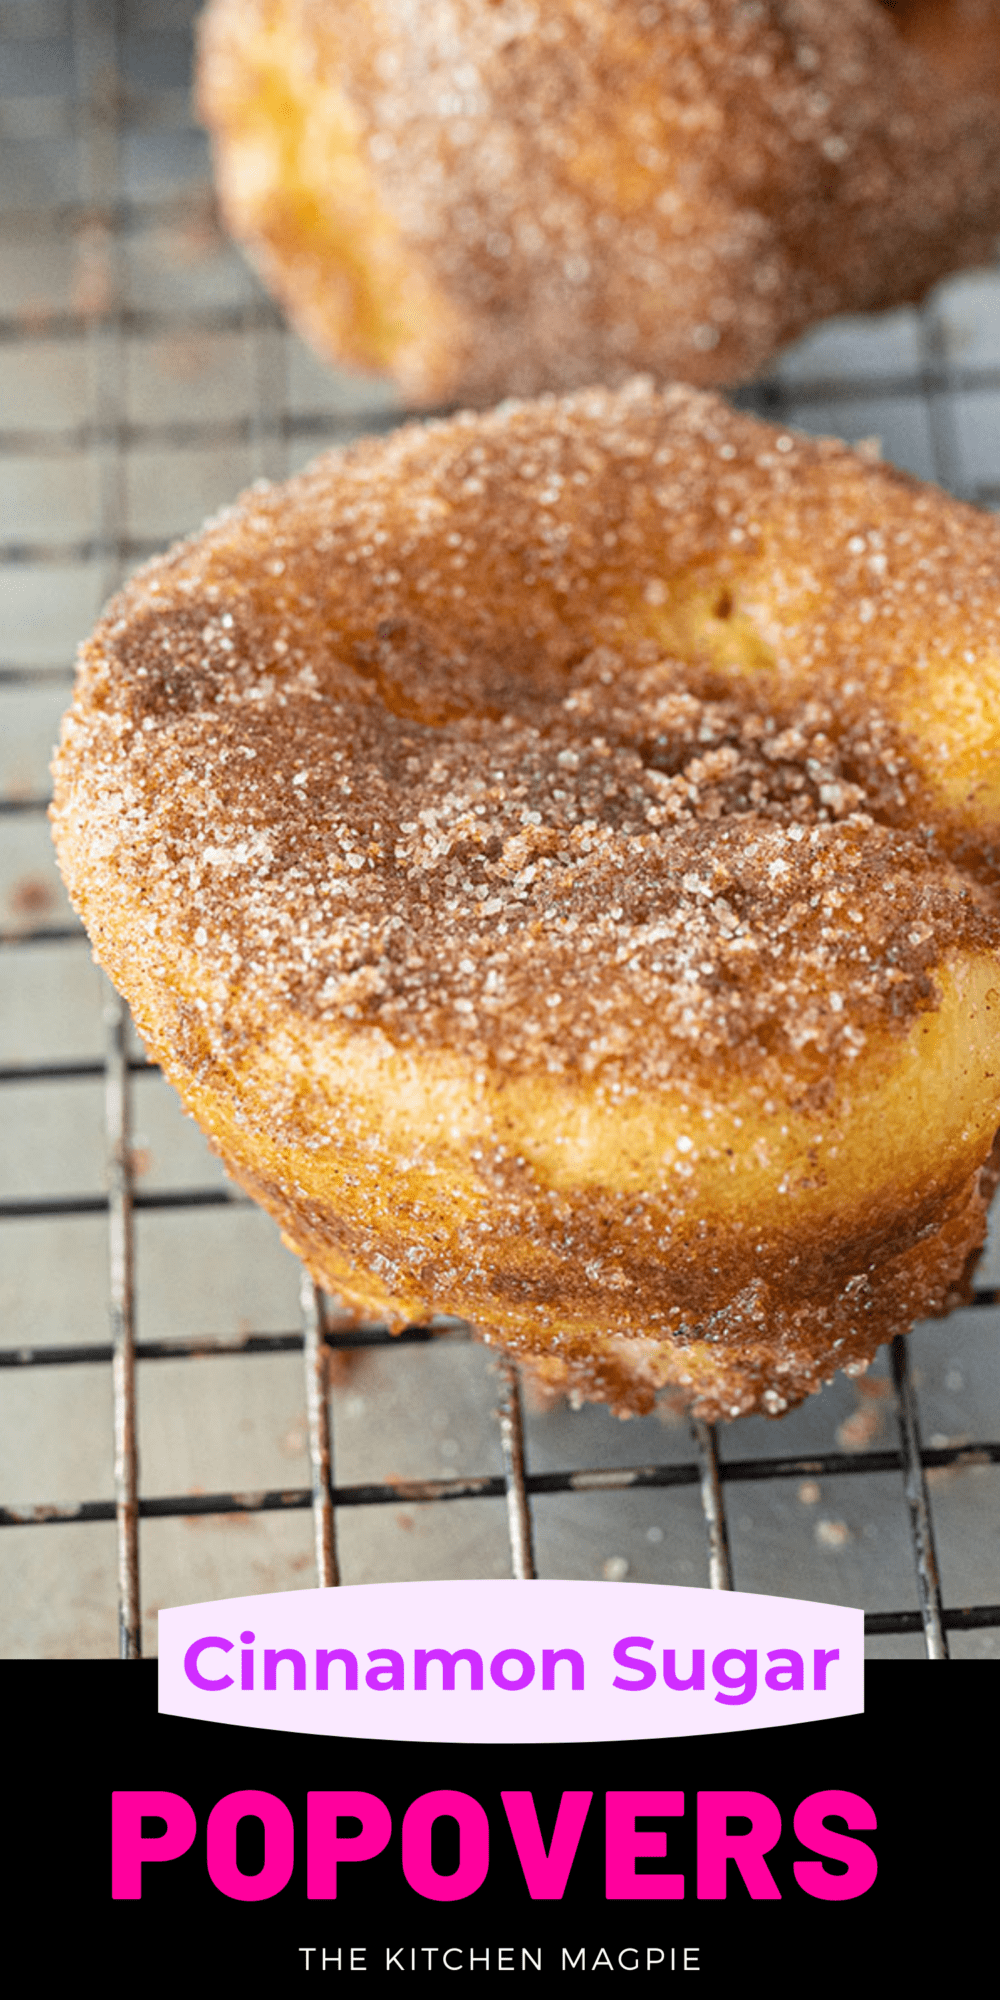 How to make delicious eggy, puffy popovers! This recipe can be savory to go with a roast beef or sweet with a cinnamon sugar coating.